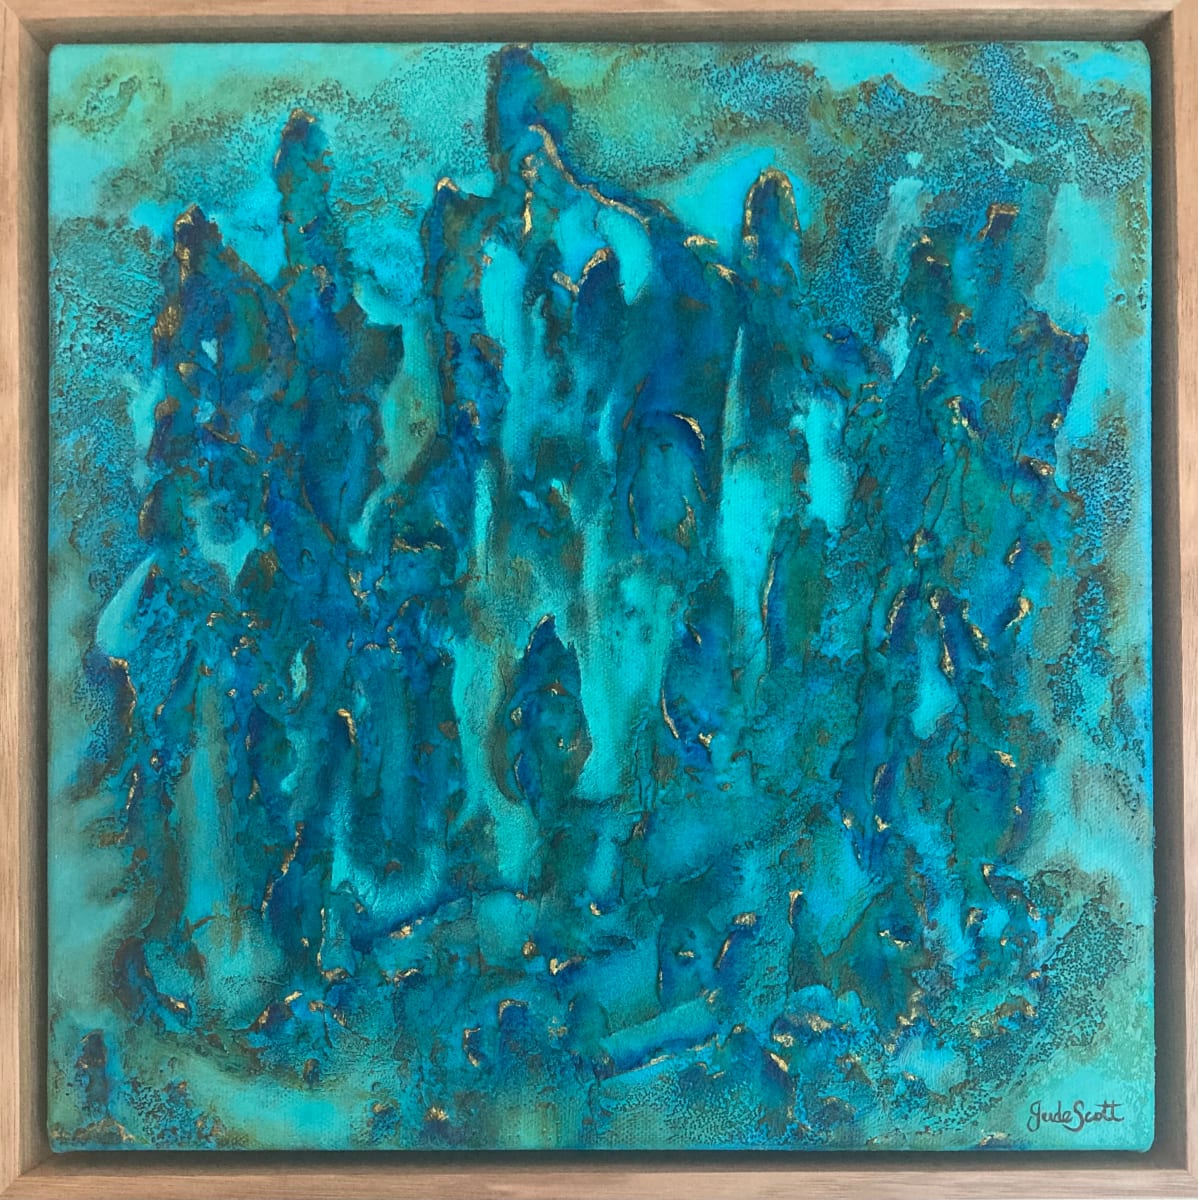 Turquoise Blue by Jude Scott  Image: Coastal environments & ocean landscapes inspired this abstract artwork. I love working with these colours to create textured pieces with mixed media.